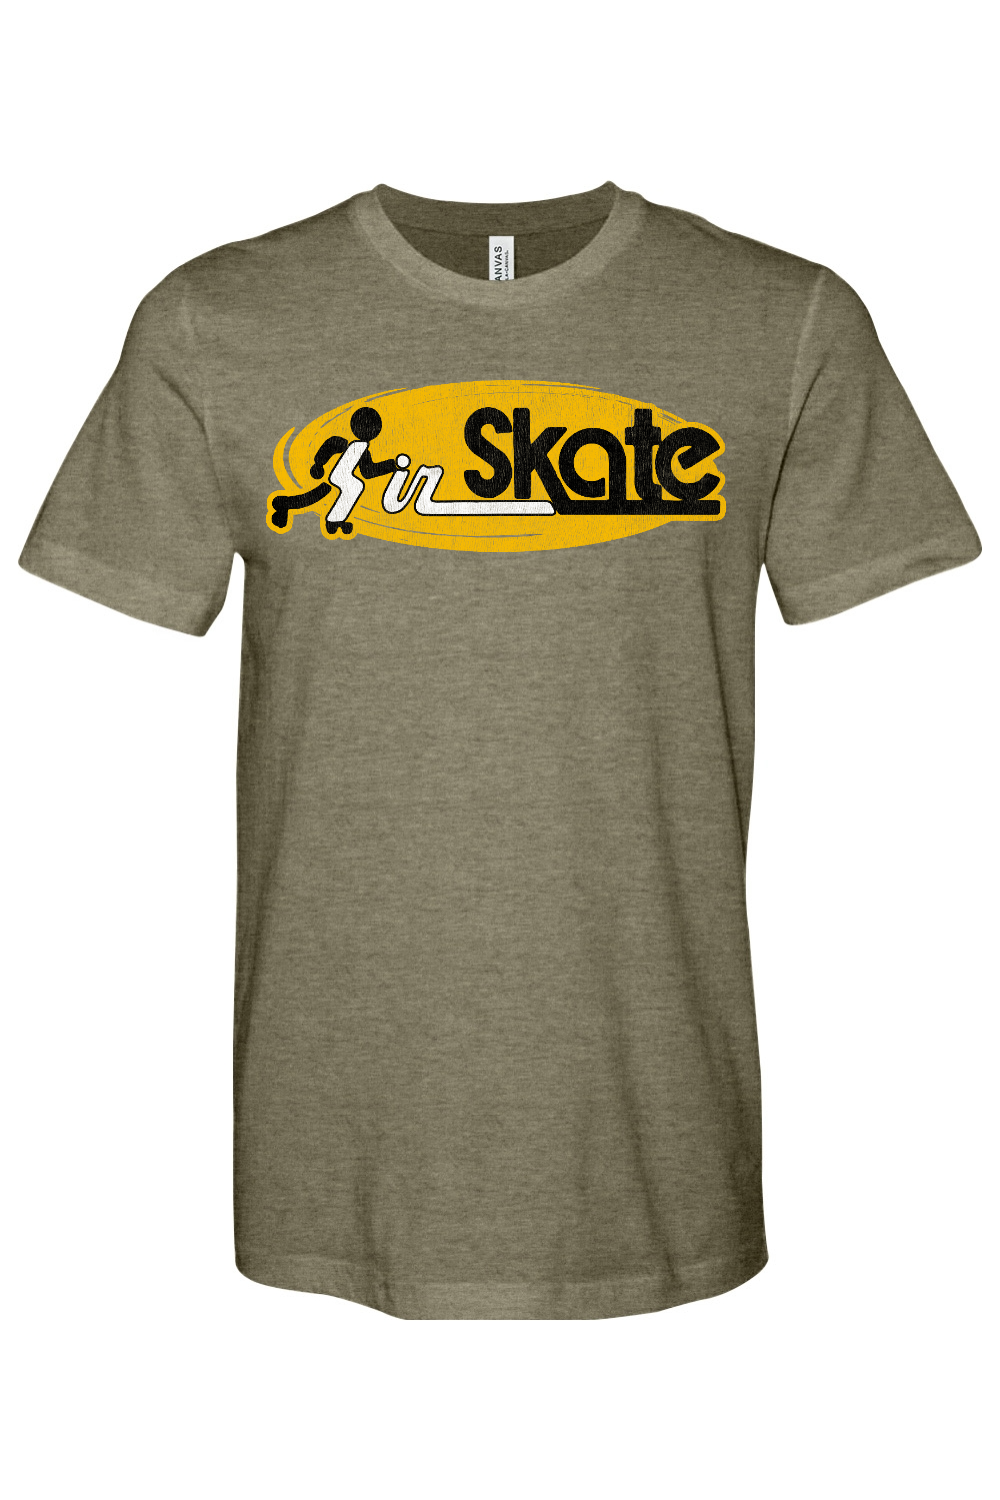 Sir Skate - Altoona/ State College, Pa Heather Olive / M